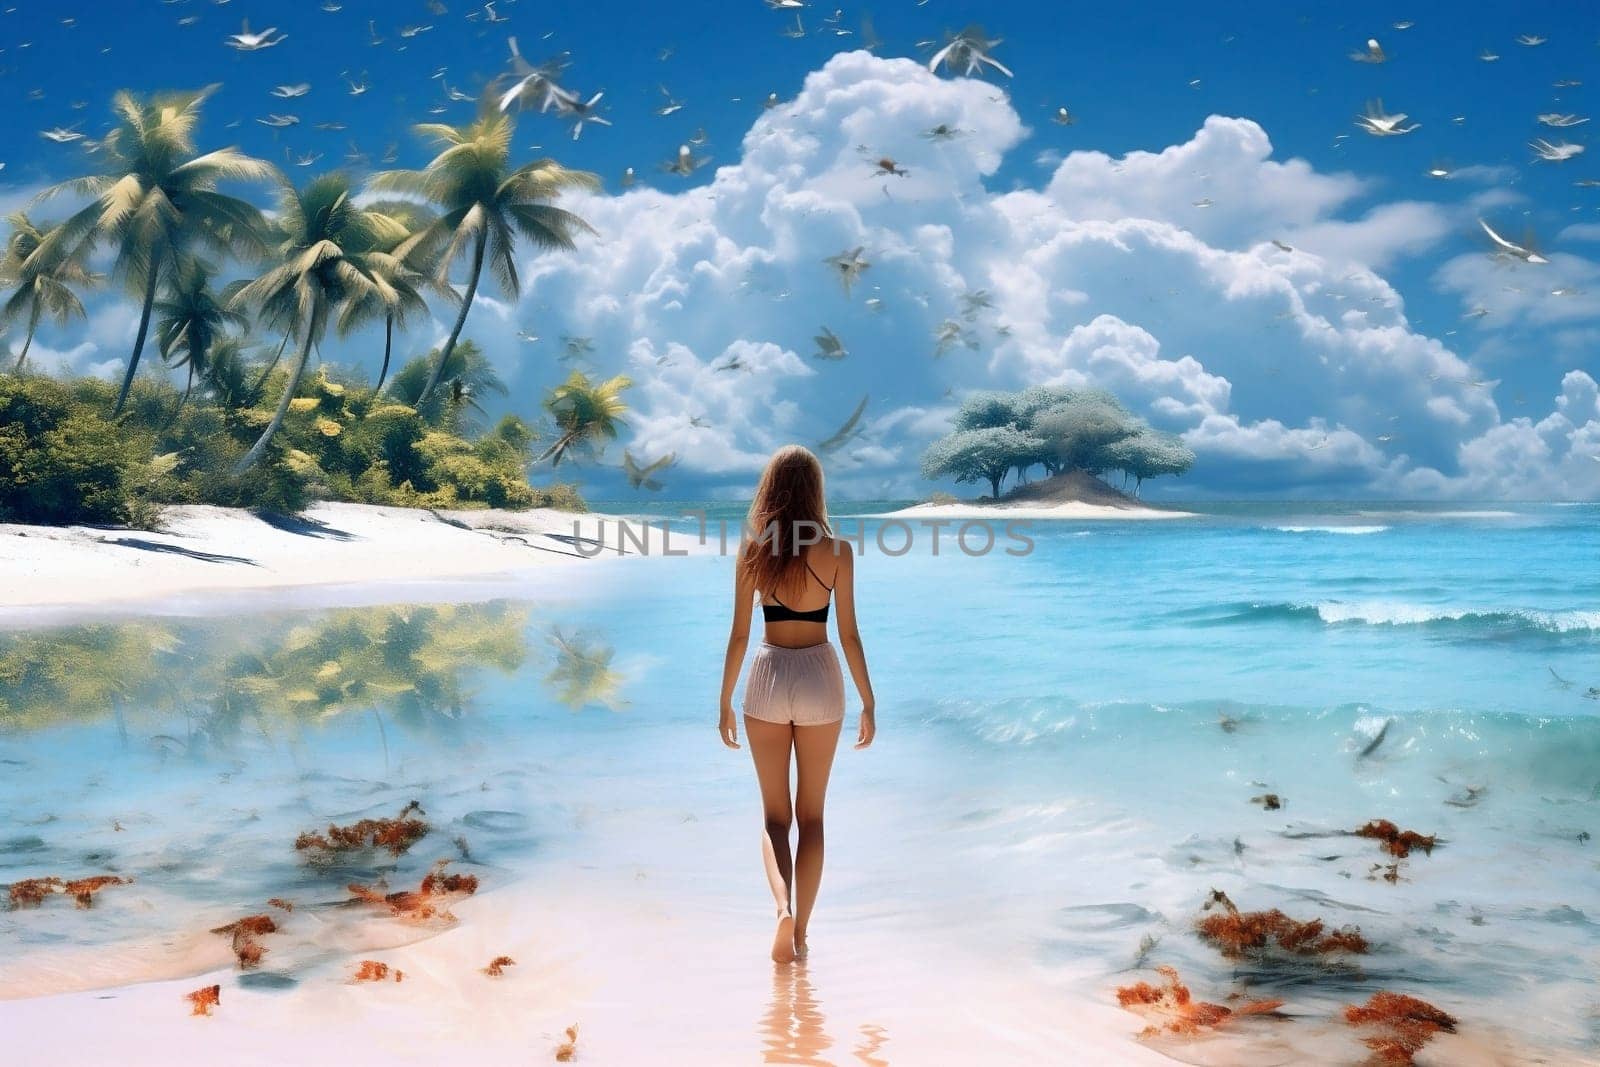 Women sky island white vacation beach relaxation holiday nature lifestyle travel beauty tropical tan body sand bikini blue summer sea female ocean person water